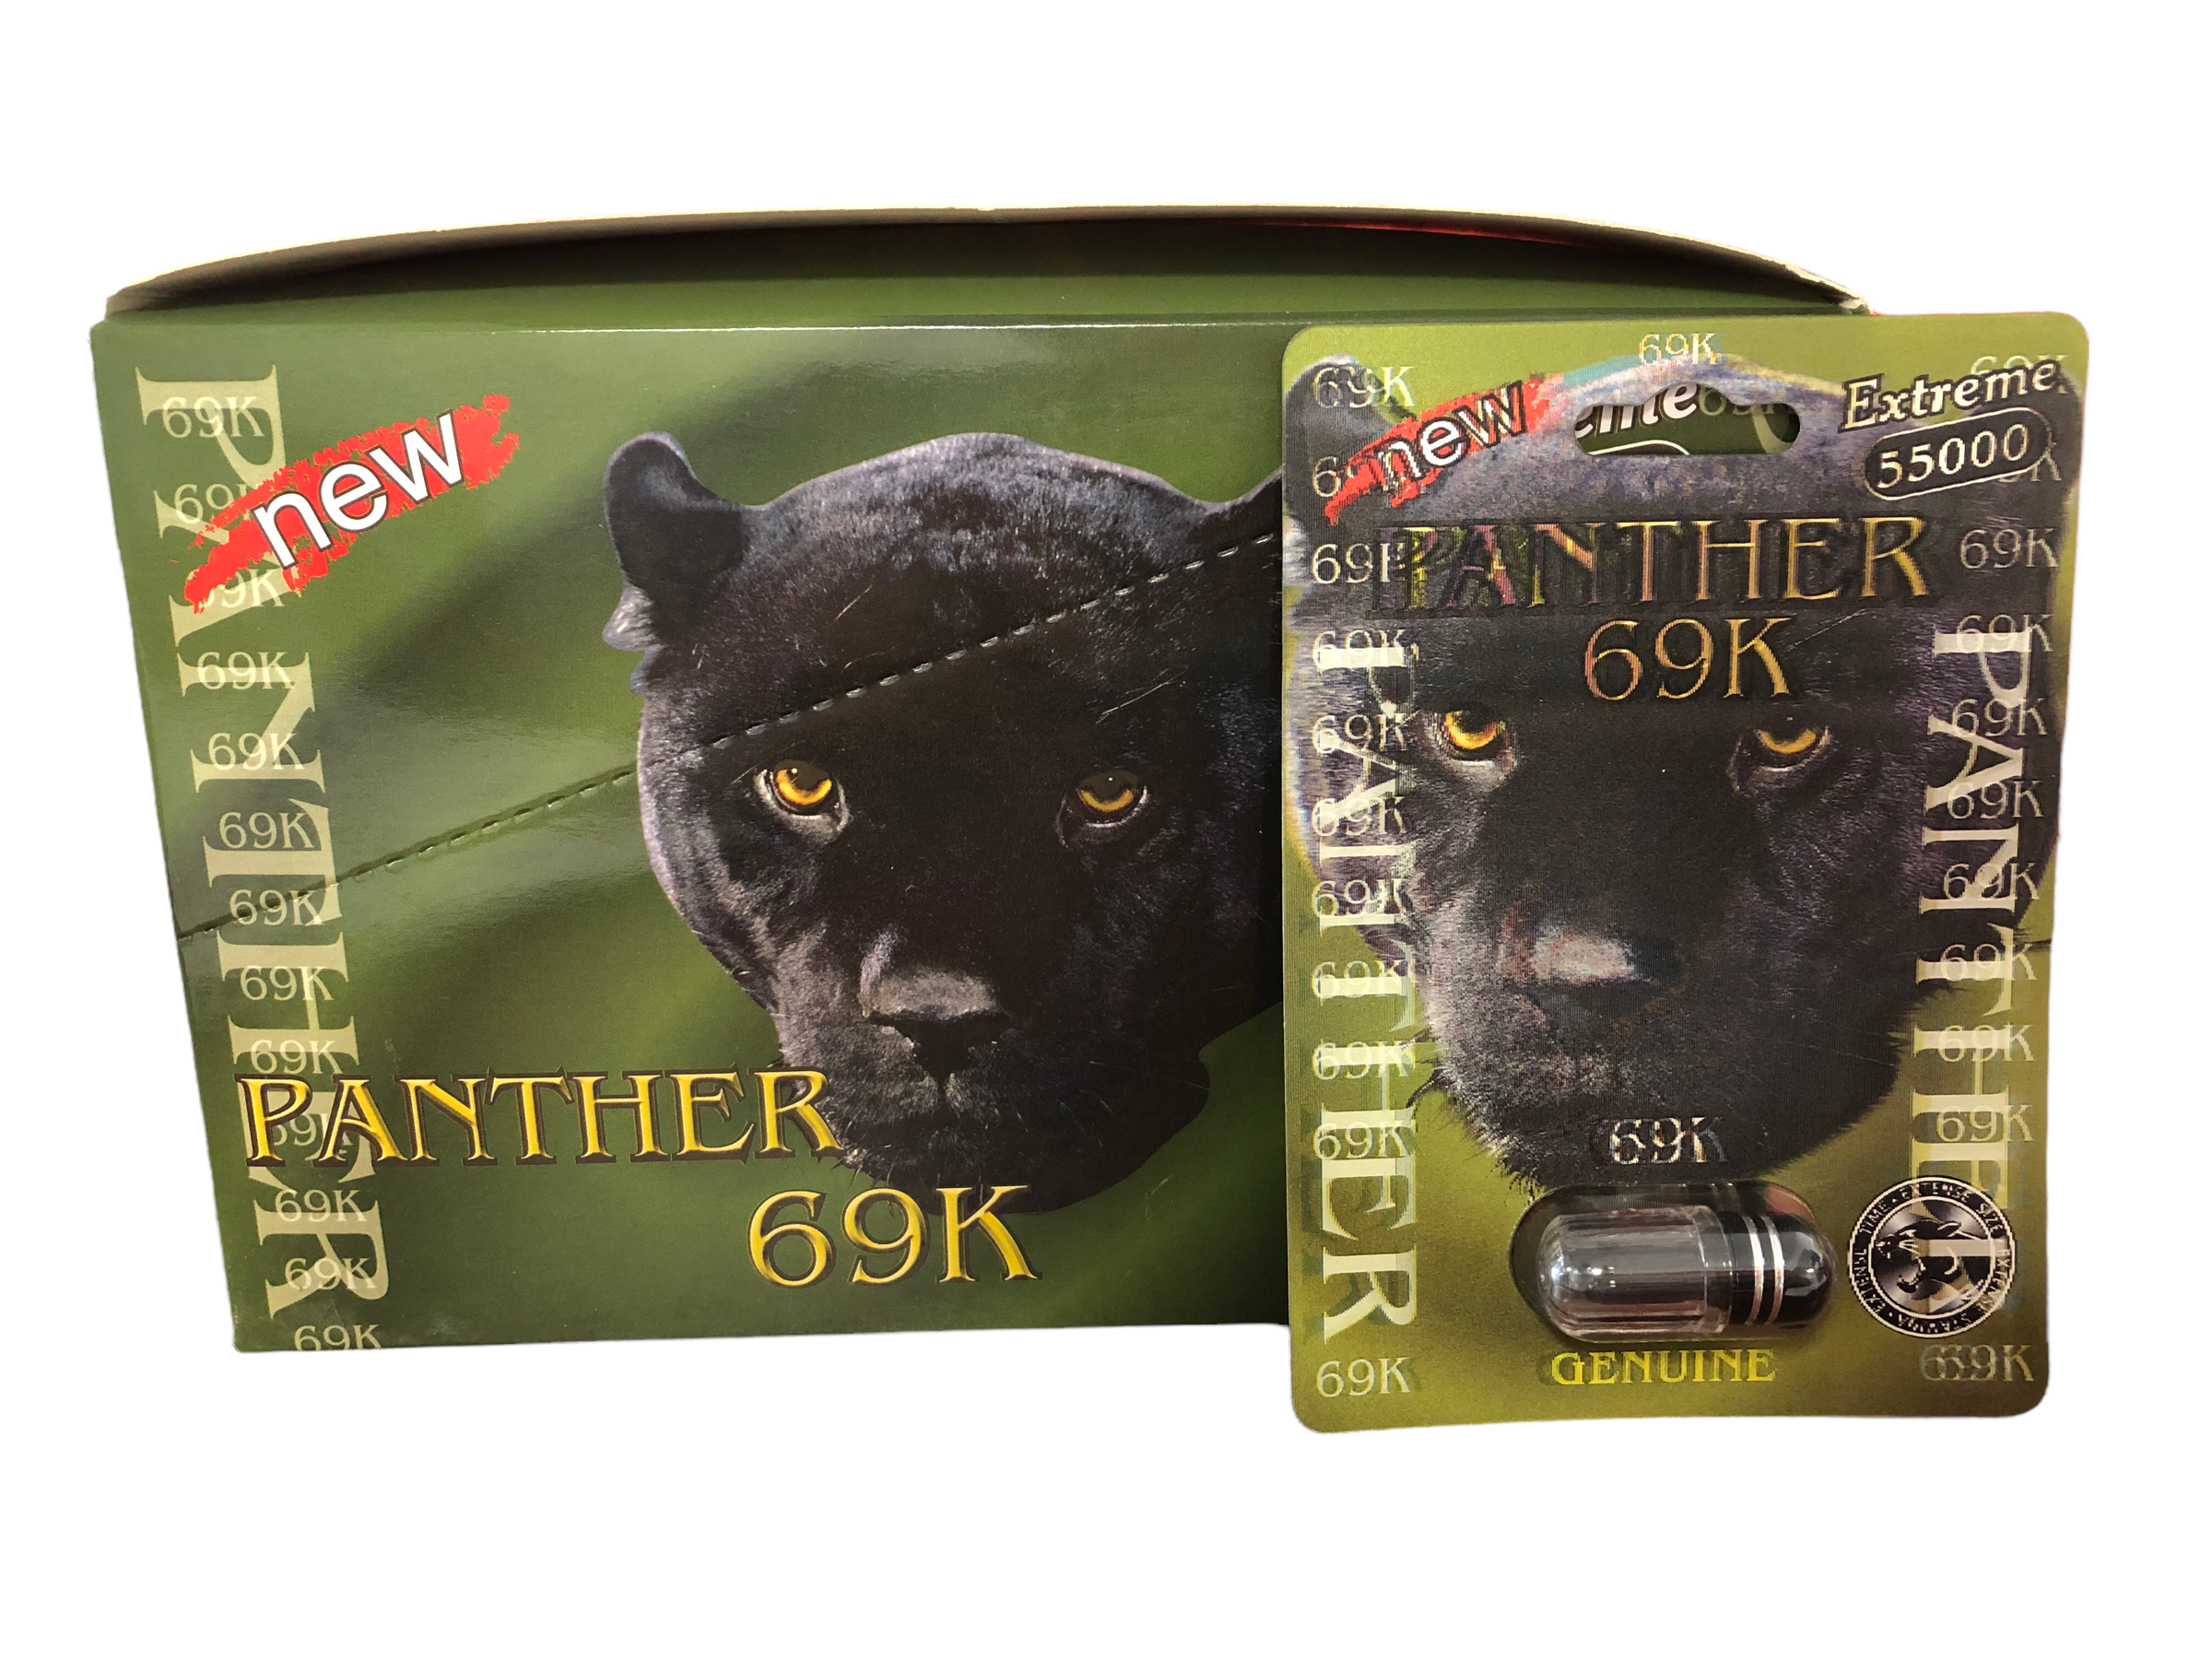 PANTHER 69 K SEX PILL | EXTREME 55000 (24 PACK)